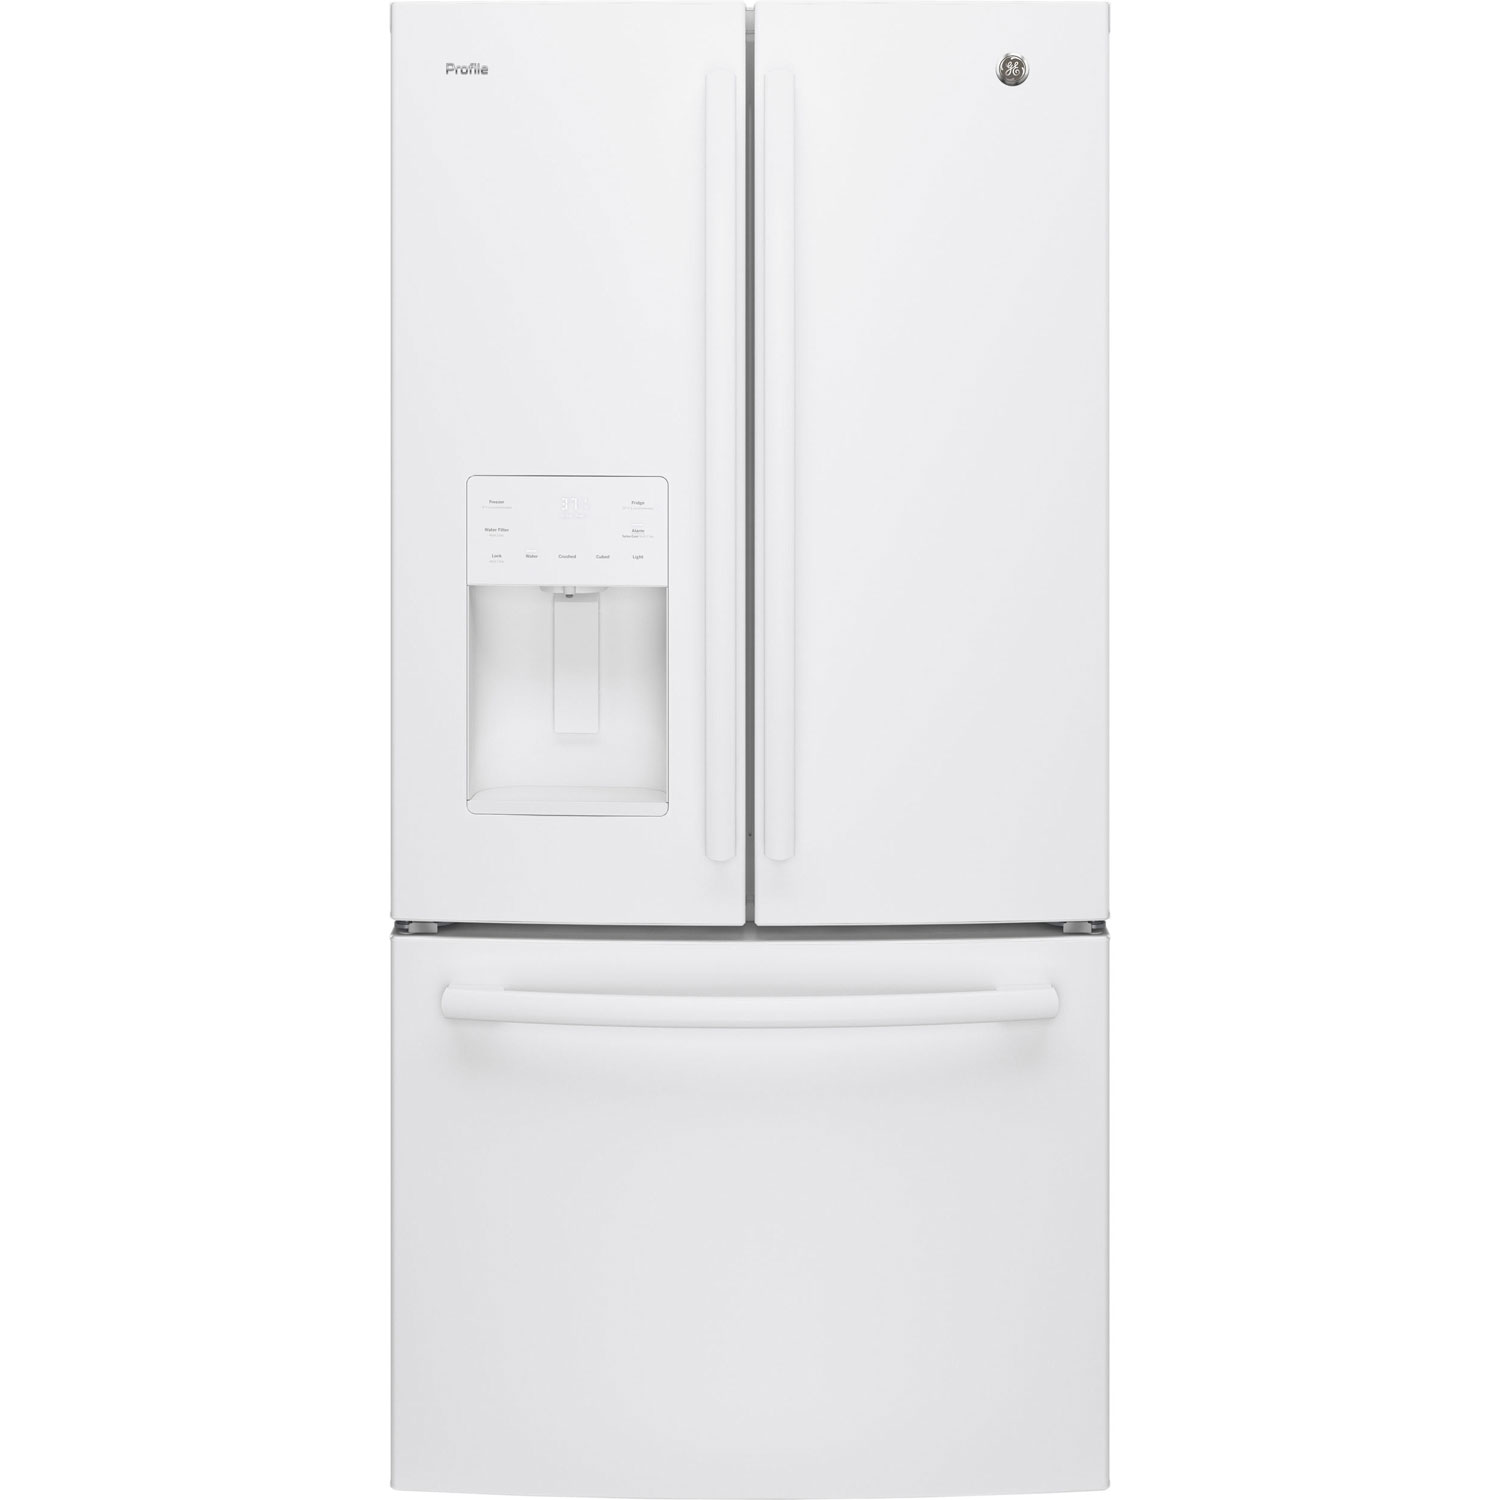 GE Profile 33" 23.8 Cu.Ft. French Door Refrigerator with Water & Ice Dispenser (PFE24HGLKWW) - White